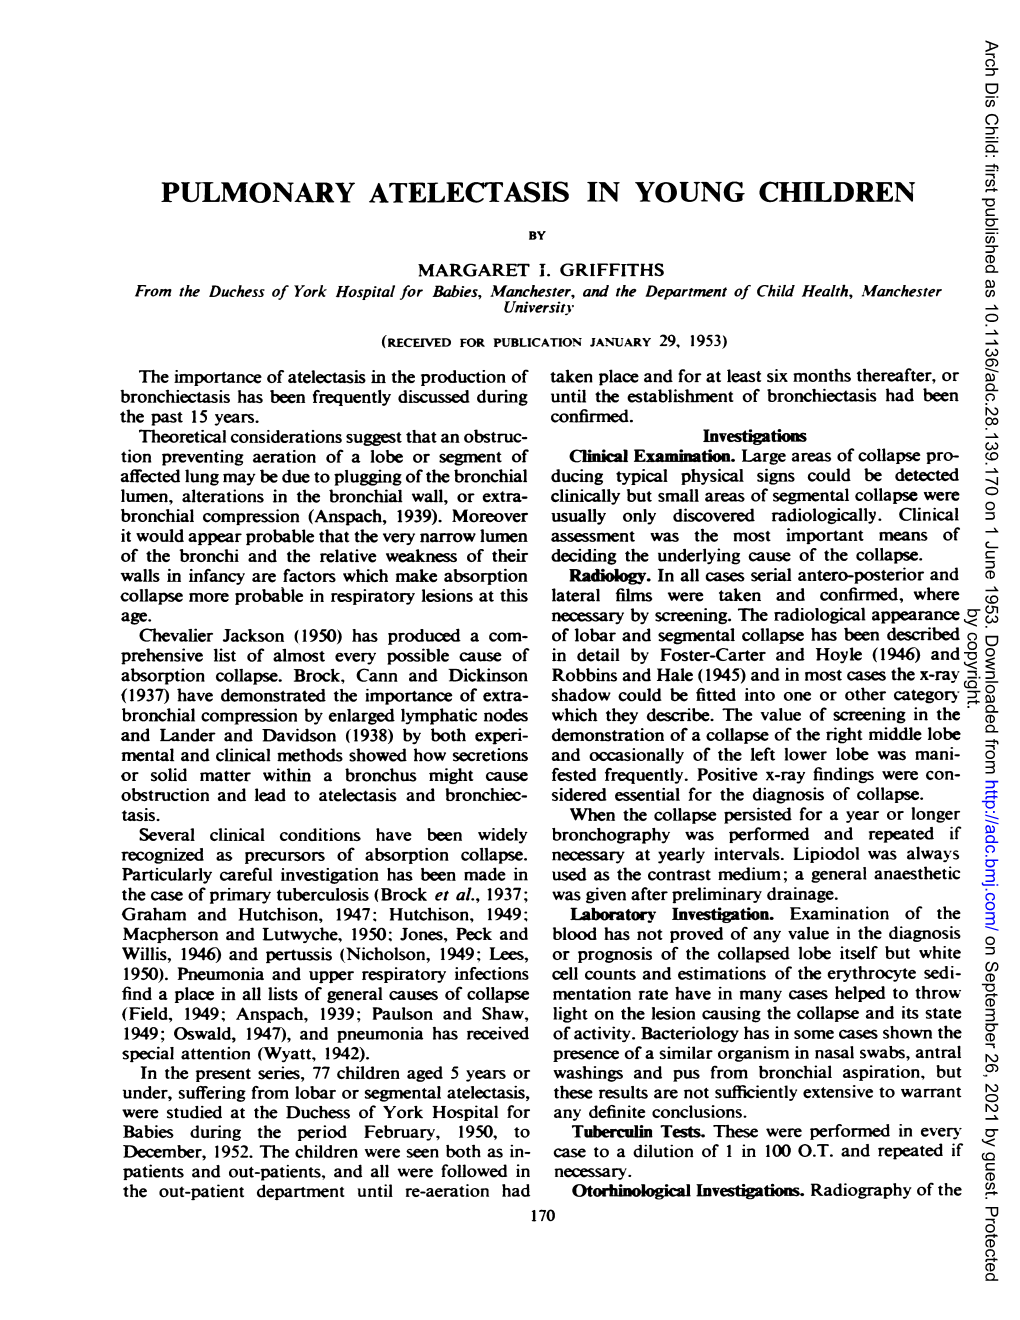 Pulmonary Atelectasis in Young Children